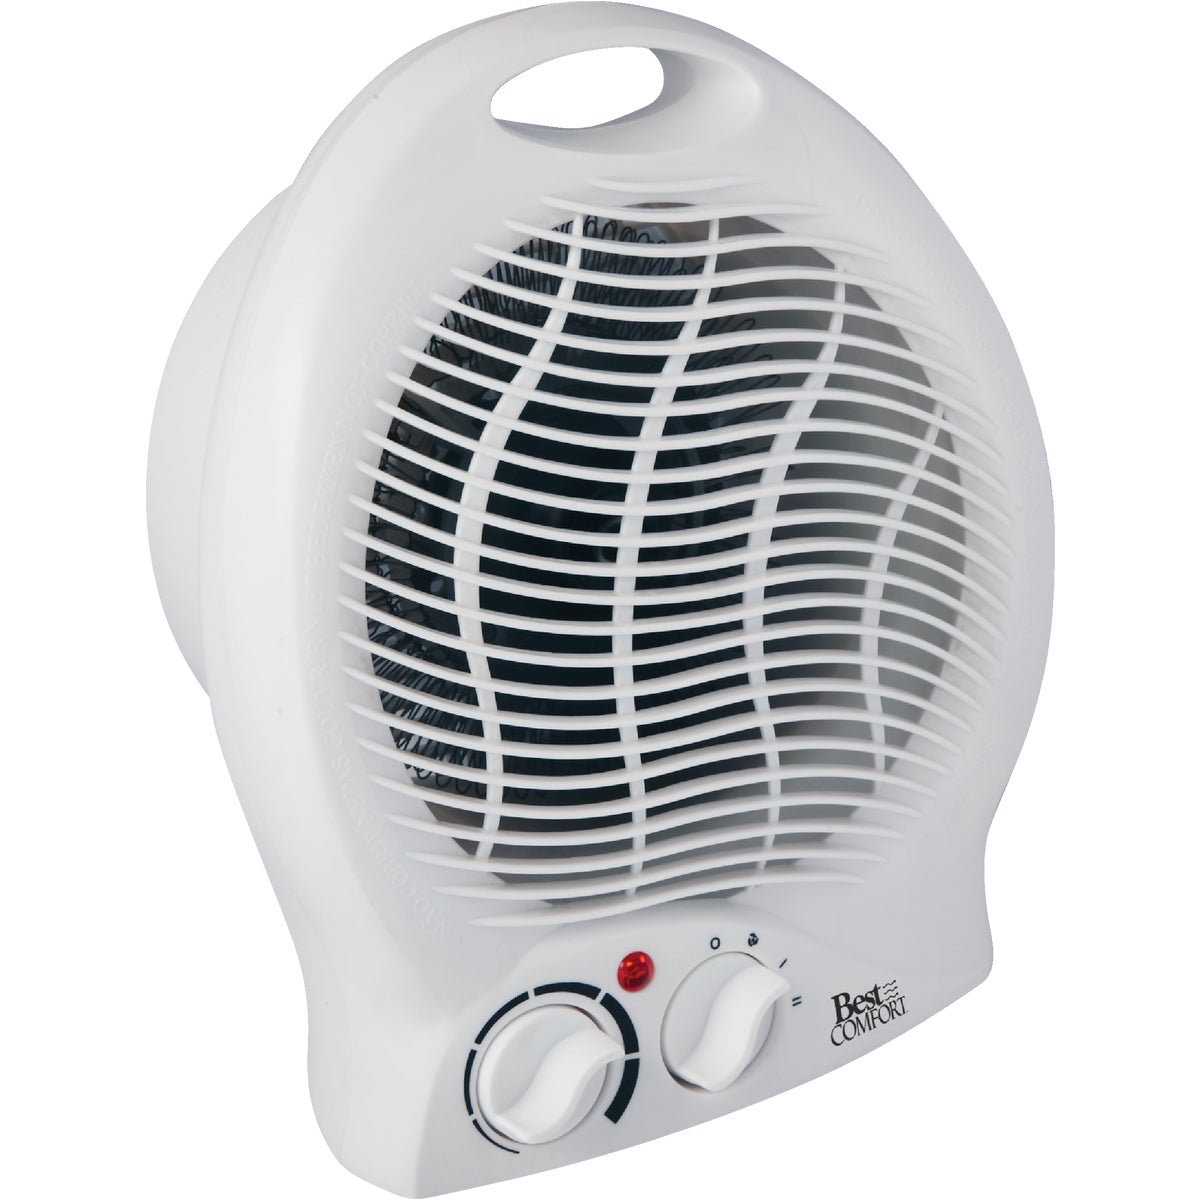 Best Comfort 1500W 120V Electric Space Heater, White